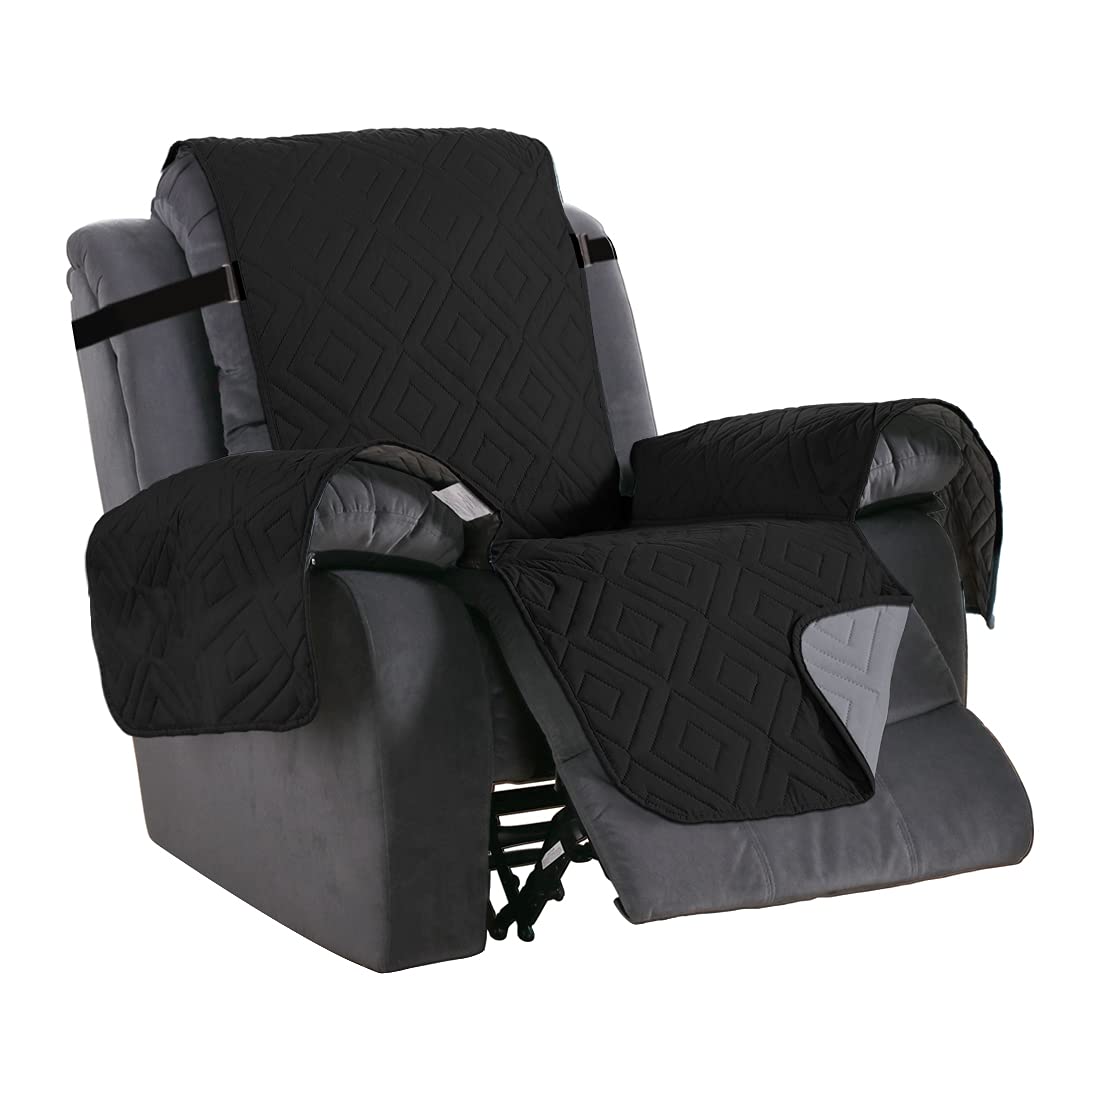 PrimeBeau New Diamond Quilted Recliner Covers Water Resistant  Protector